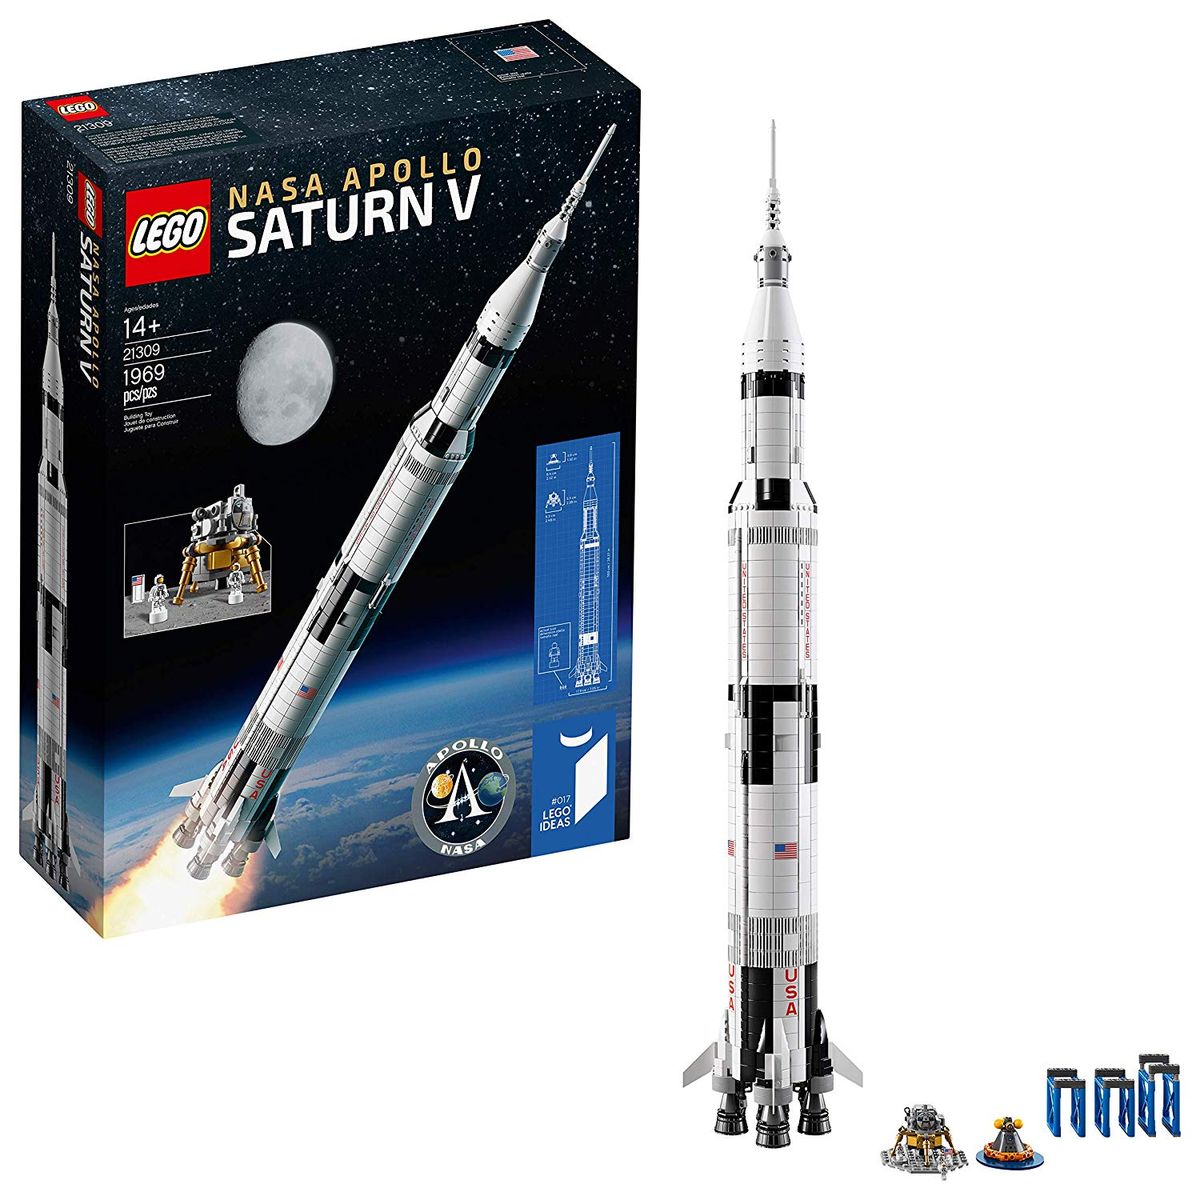 Black Friday Lego Deals: The Best Lego Ideas for Space Fans